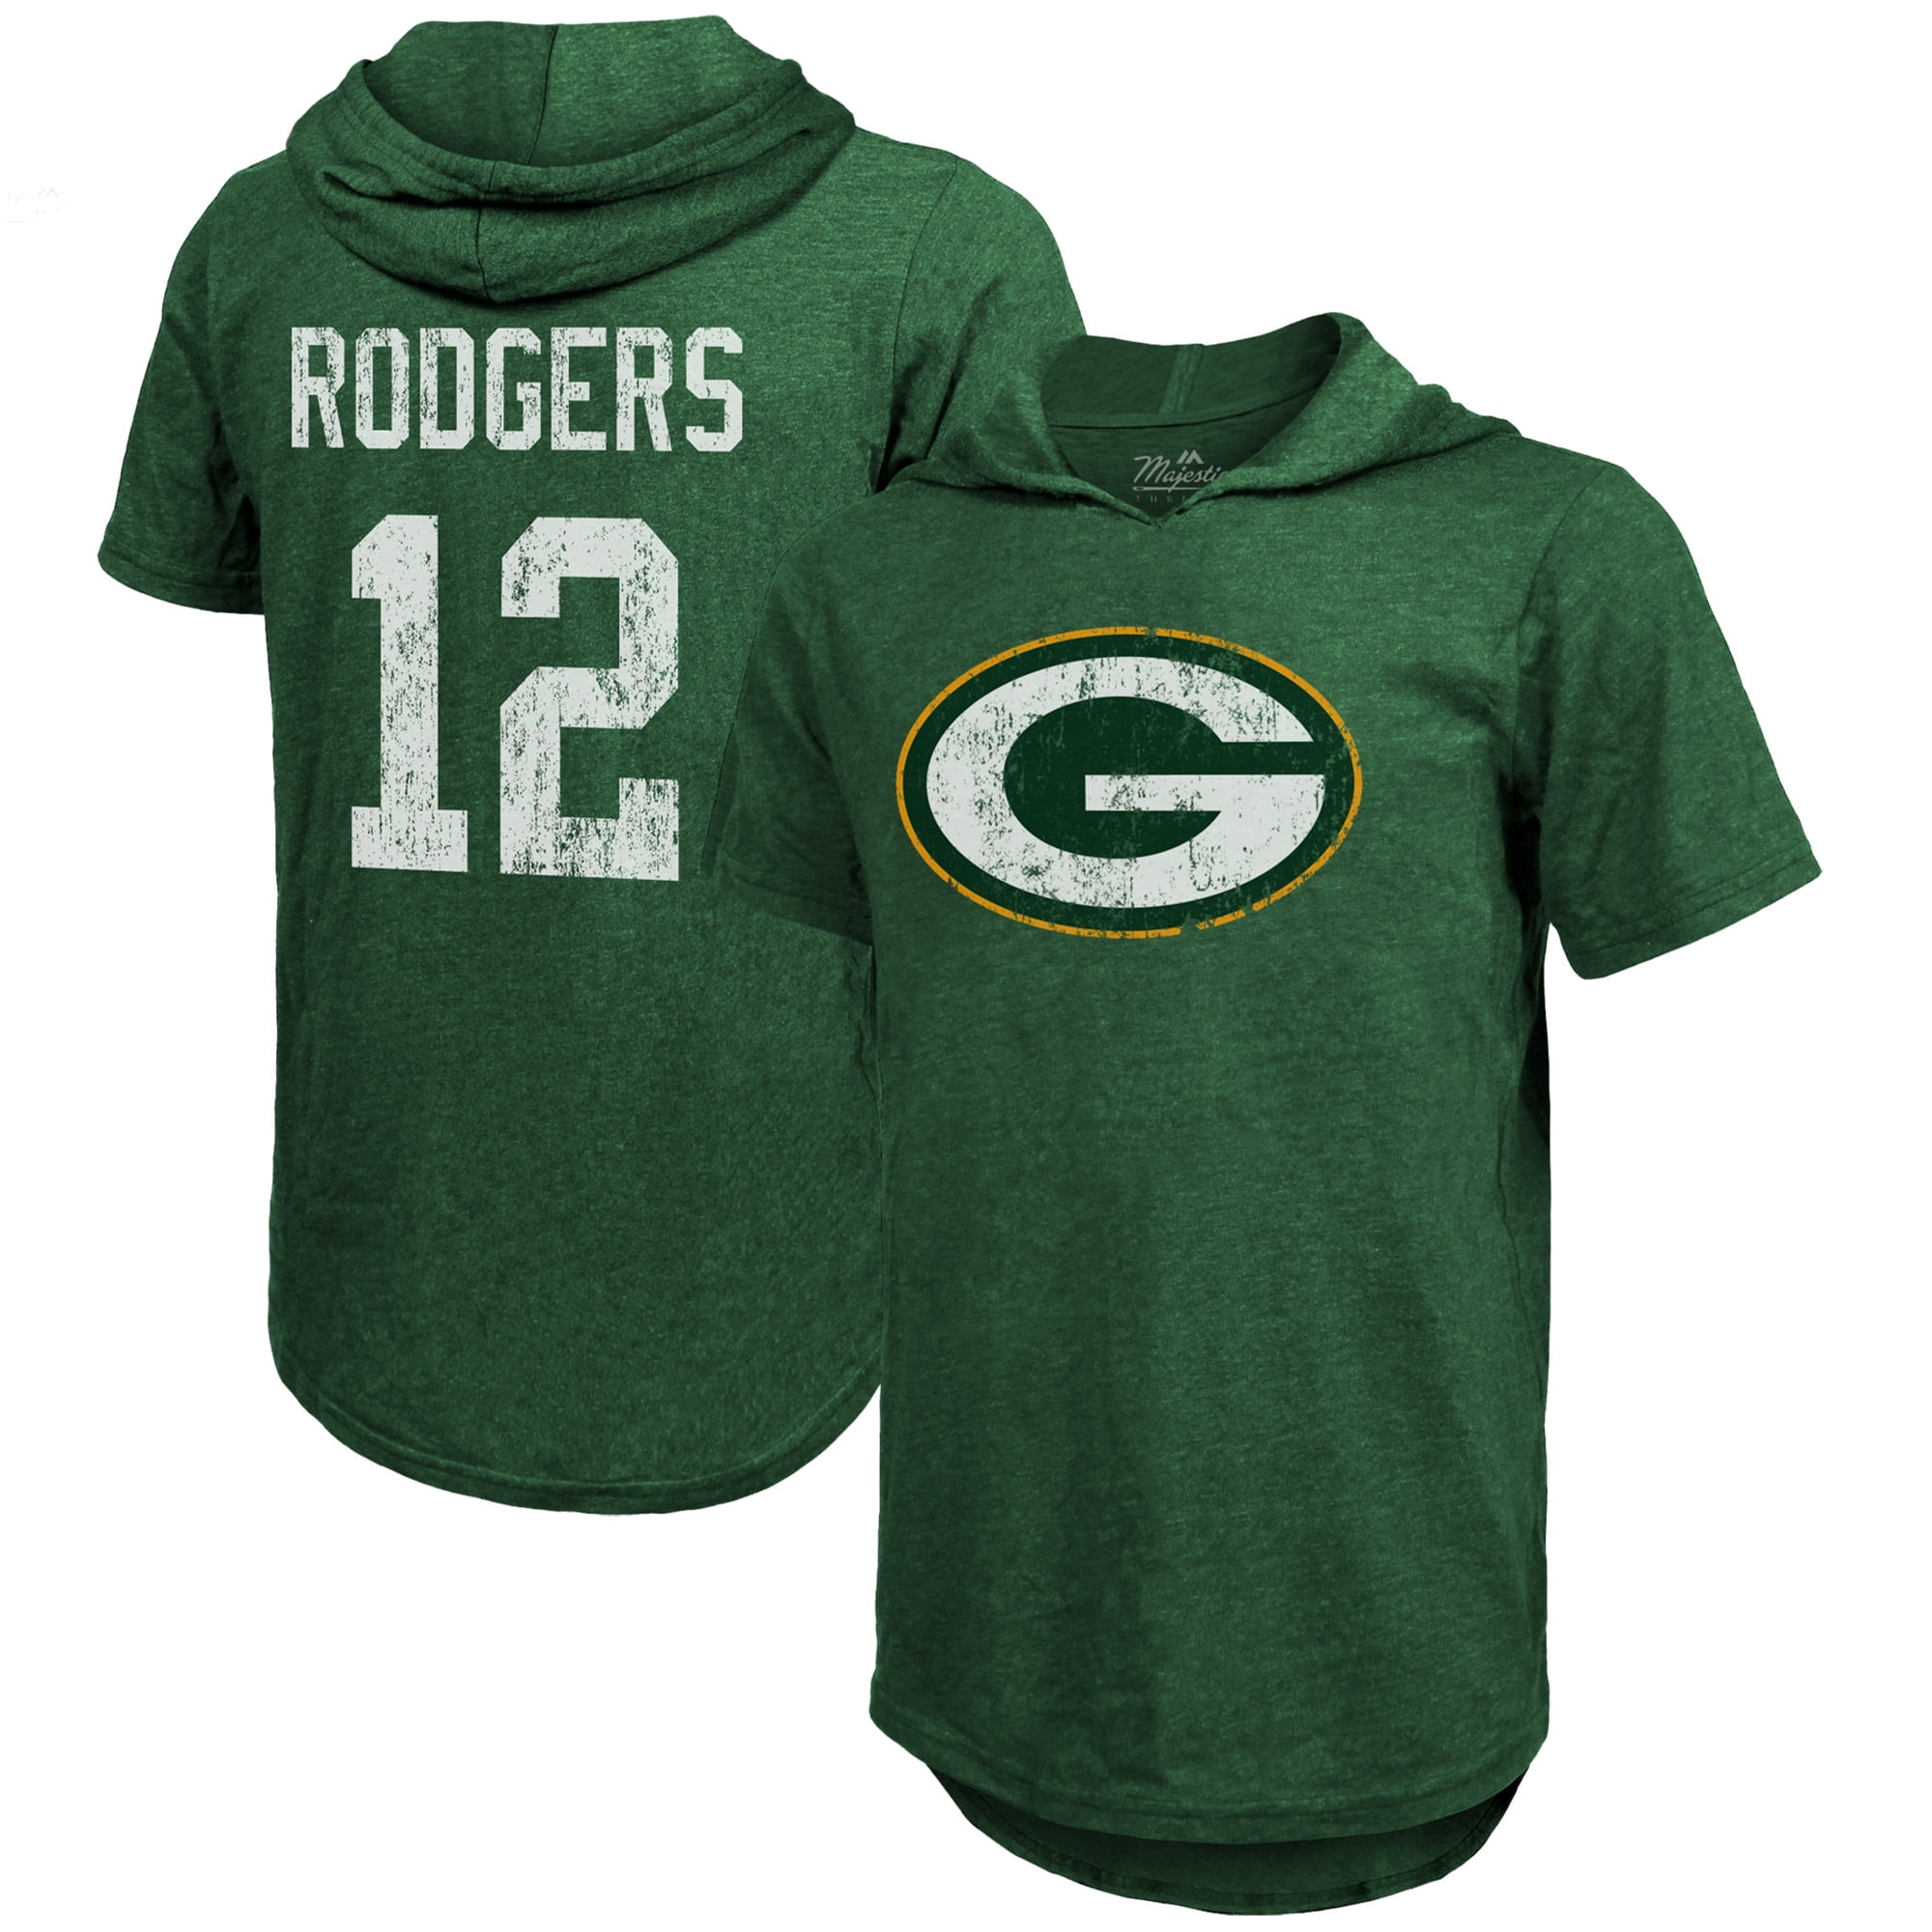 aaron rodgers t shirt